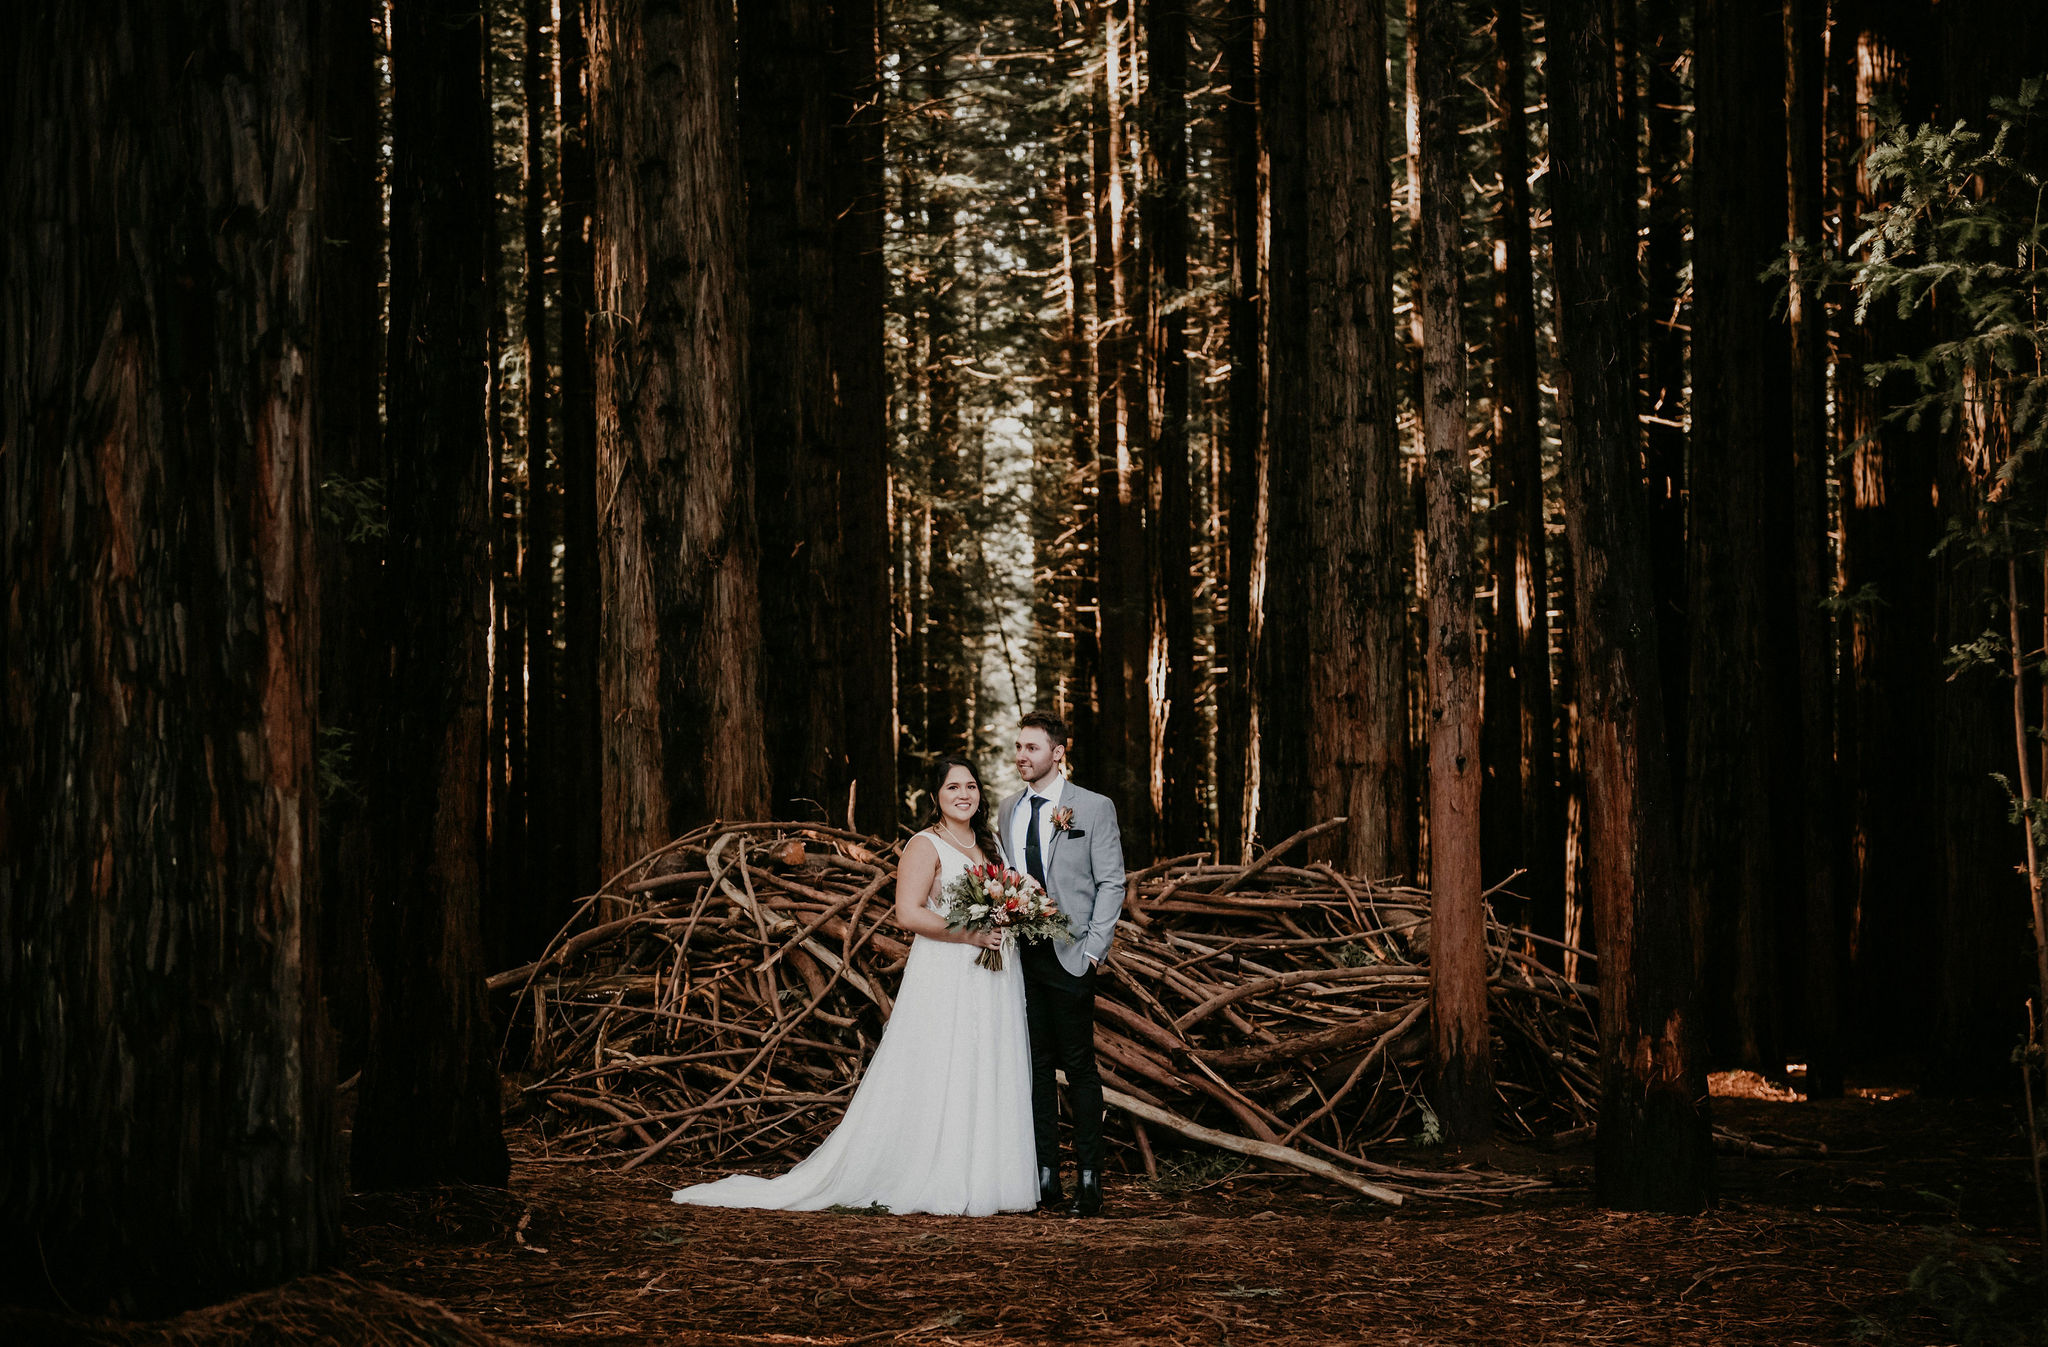 Lets-Elope-Melbourne-Celebrant-Photographer-Elopement-Package-Victoria-Sarah-Matler-Photography-Videography-Video-Warburton-Redwood-Forest-weddings-intimate-17